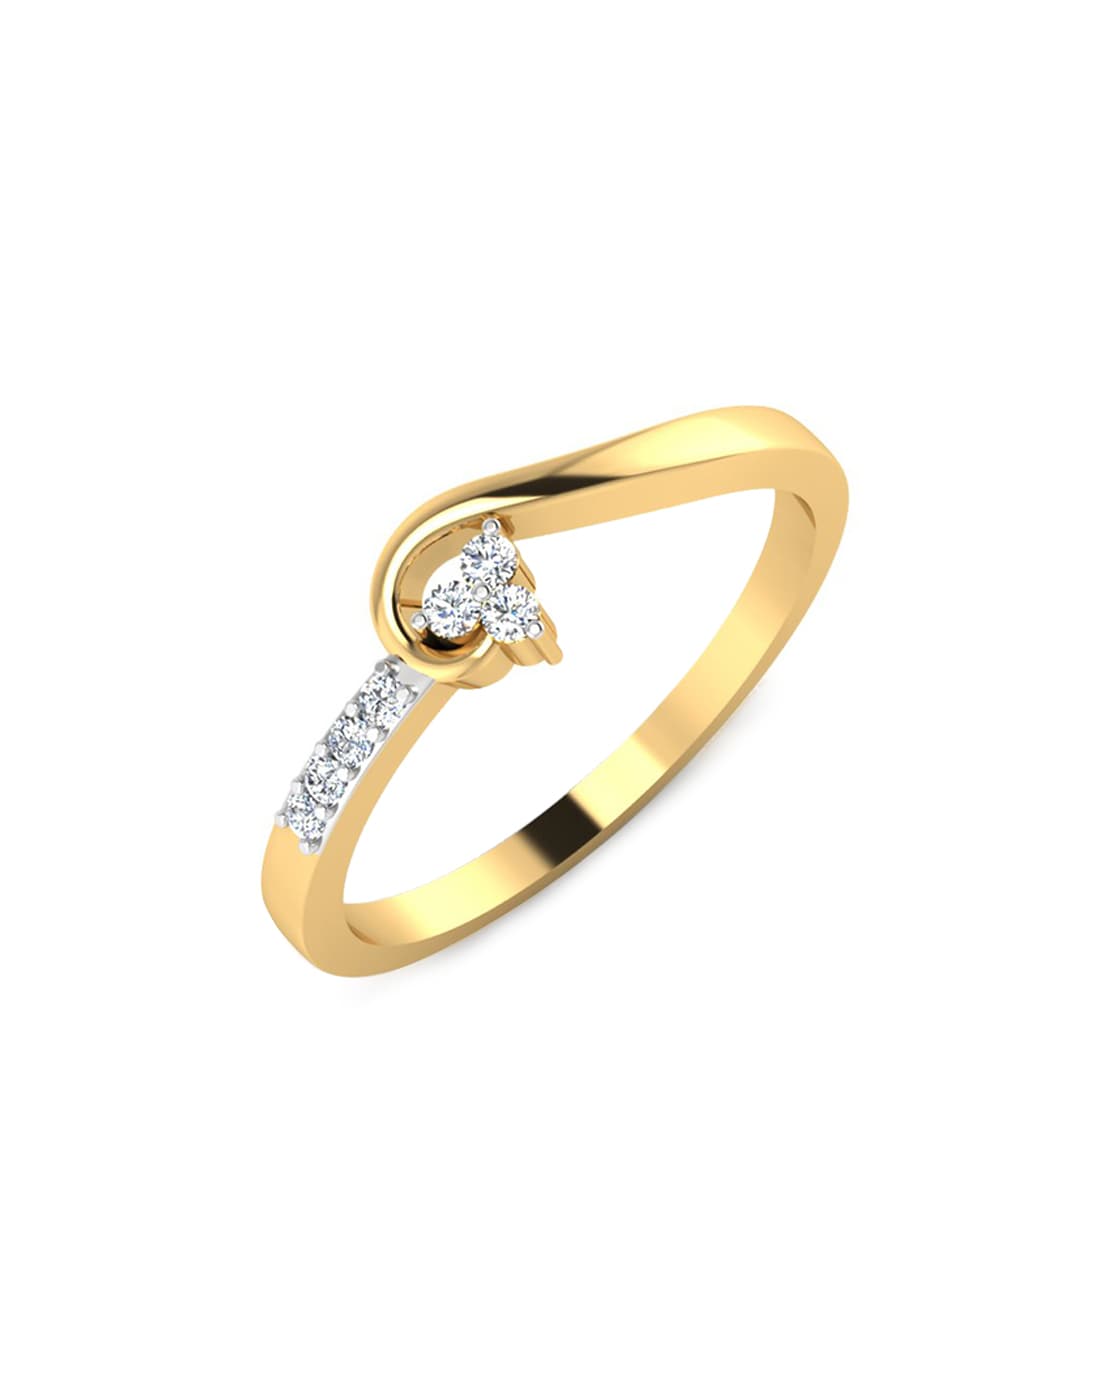 Multicolored Jadau Cocktail Ring in Gold Plated Silver LR 023